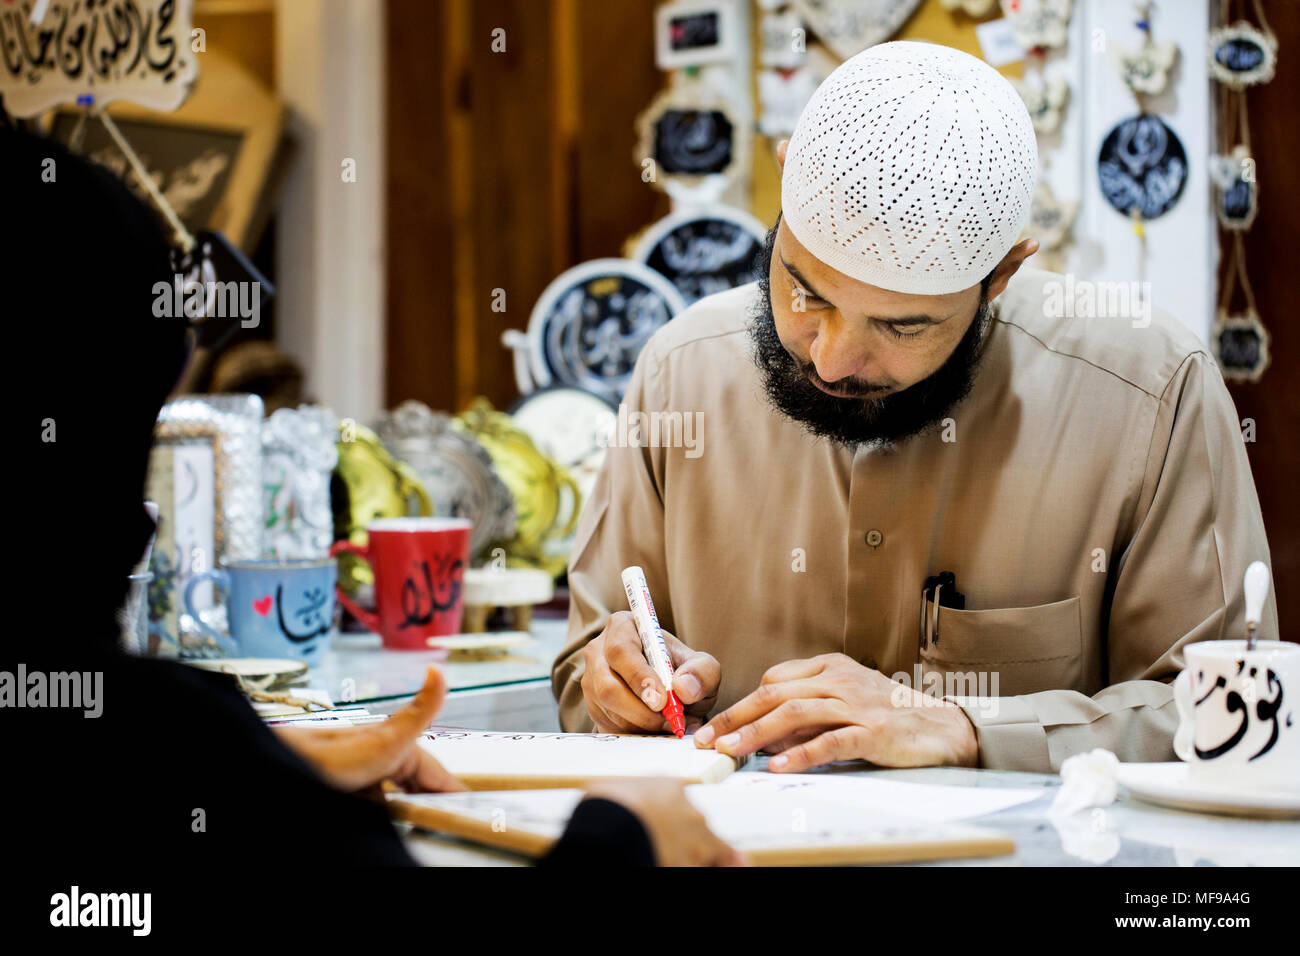 Ceramics being personalised with Arabic script at a souq in Kuwait Stock Photo